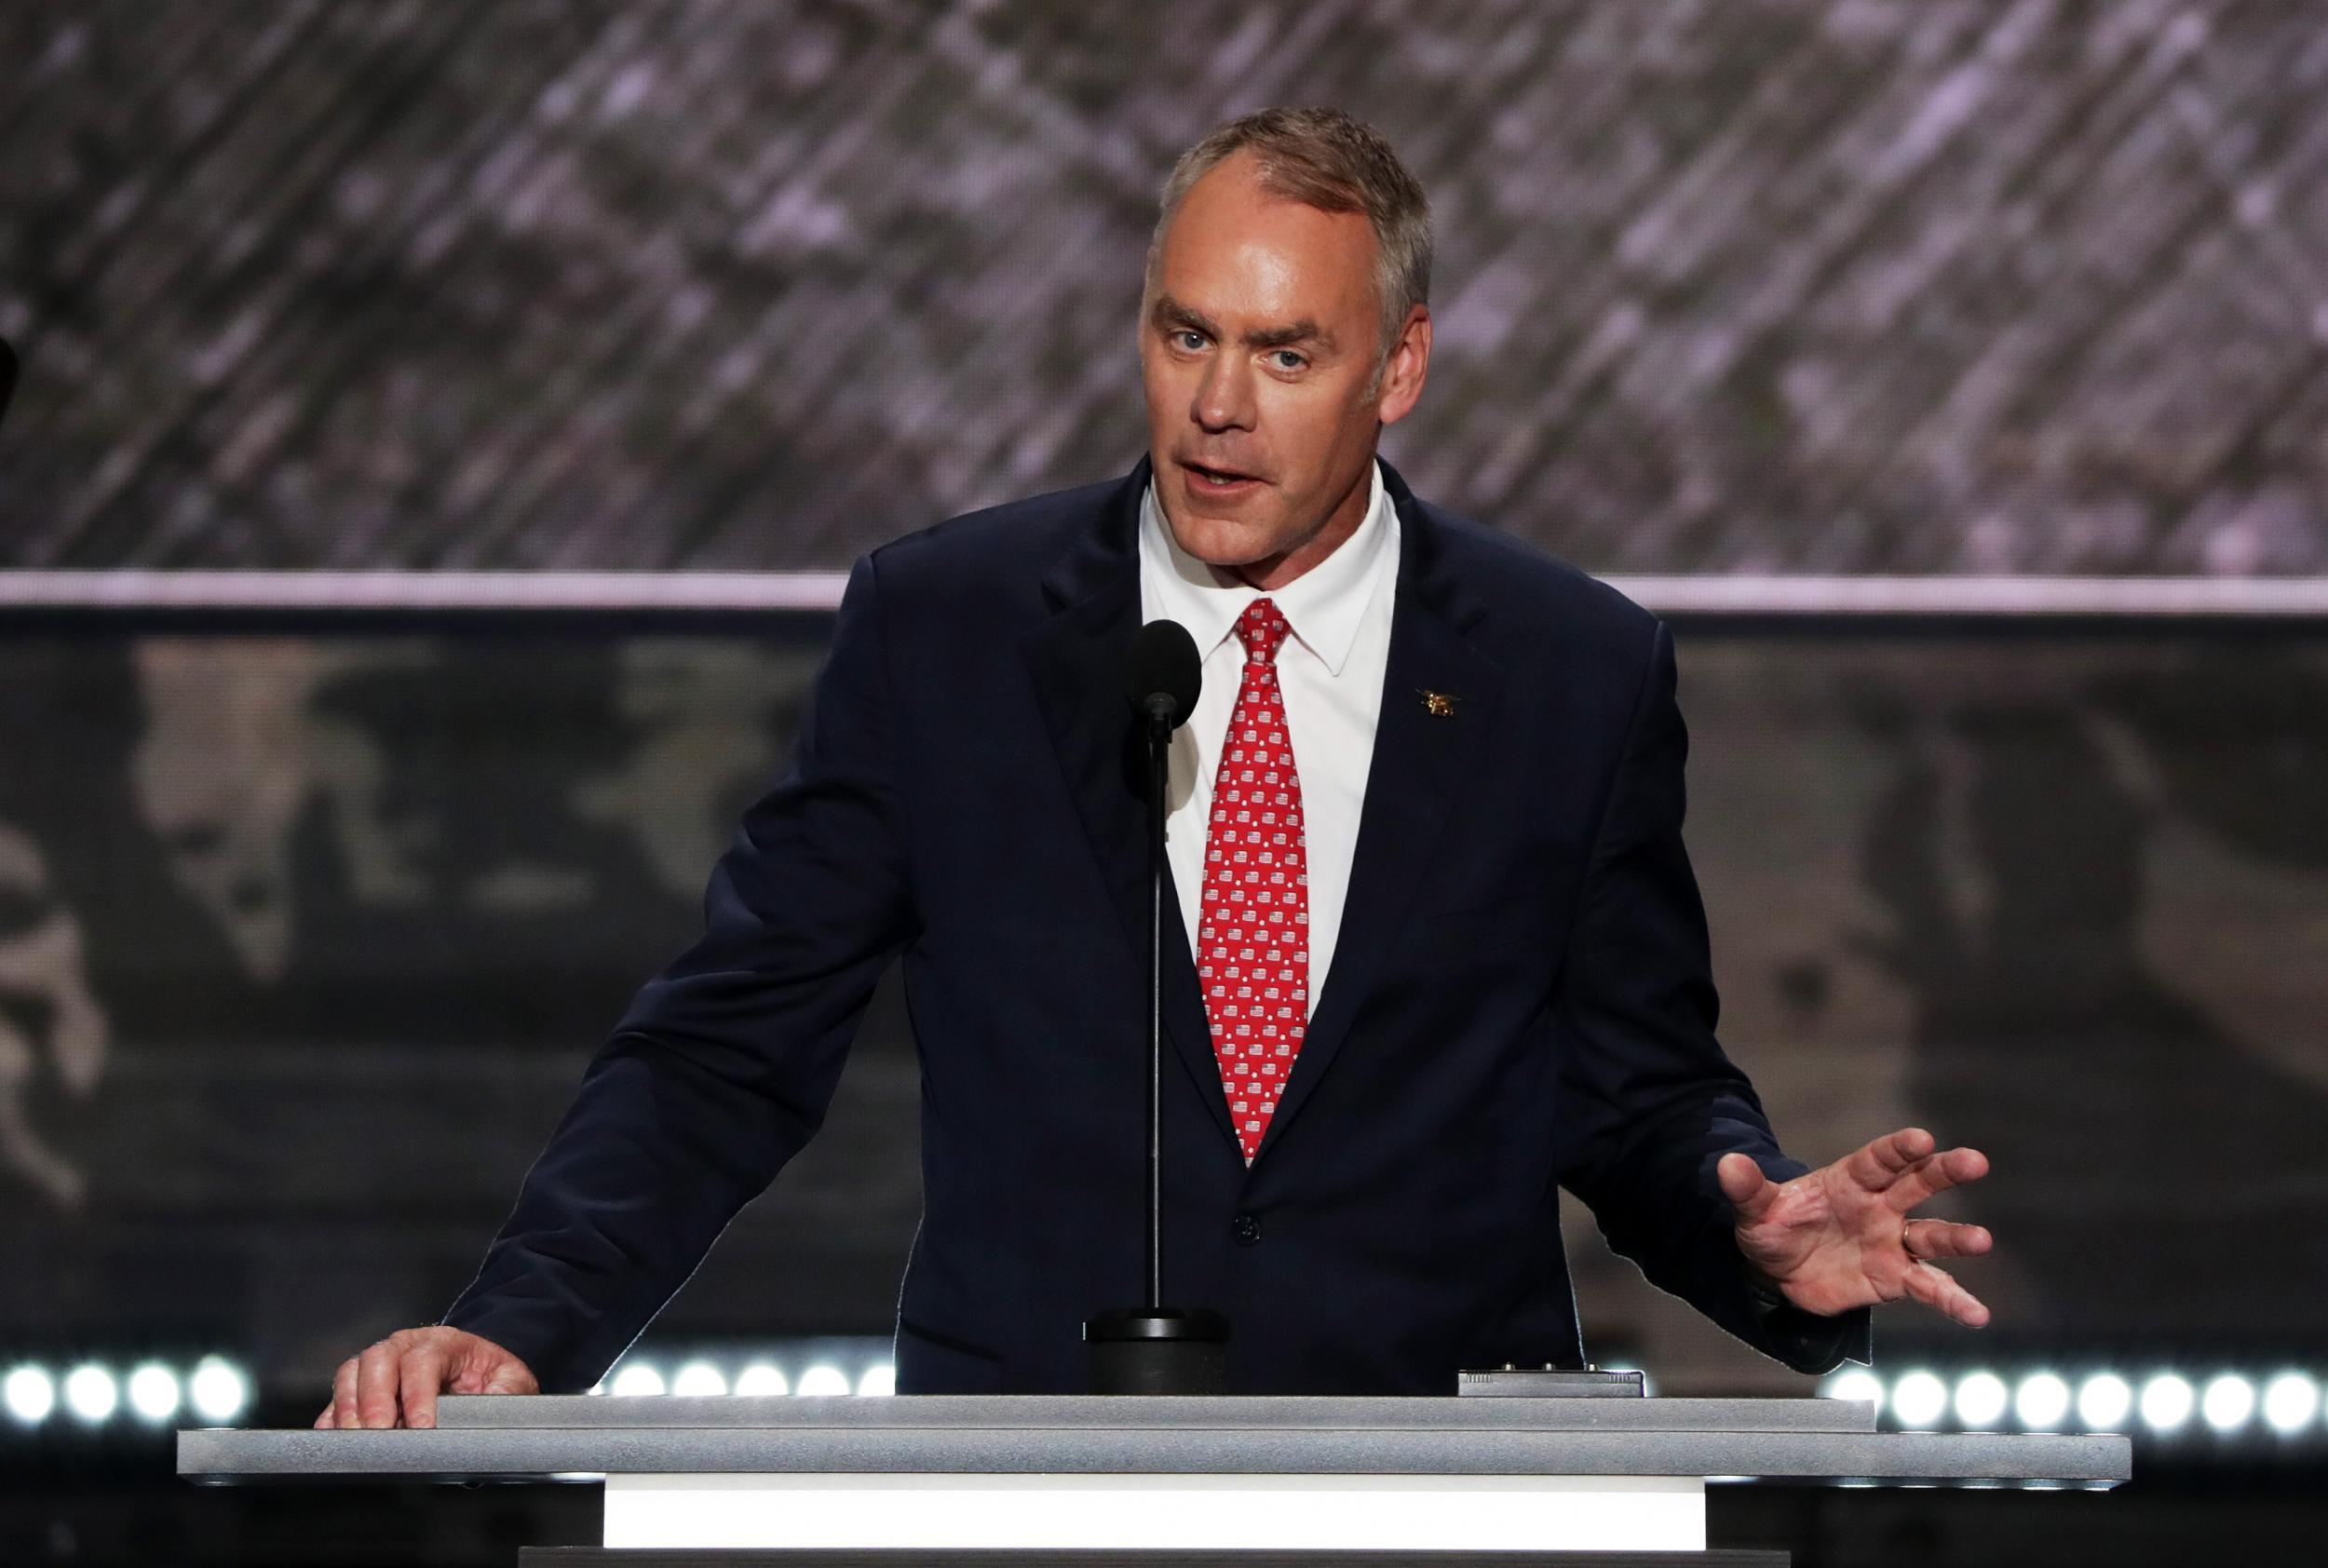 Mr Zinke is on the transition team for military veteran issues